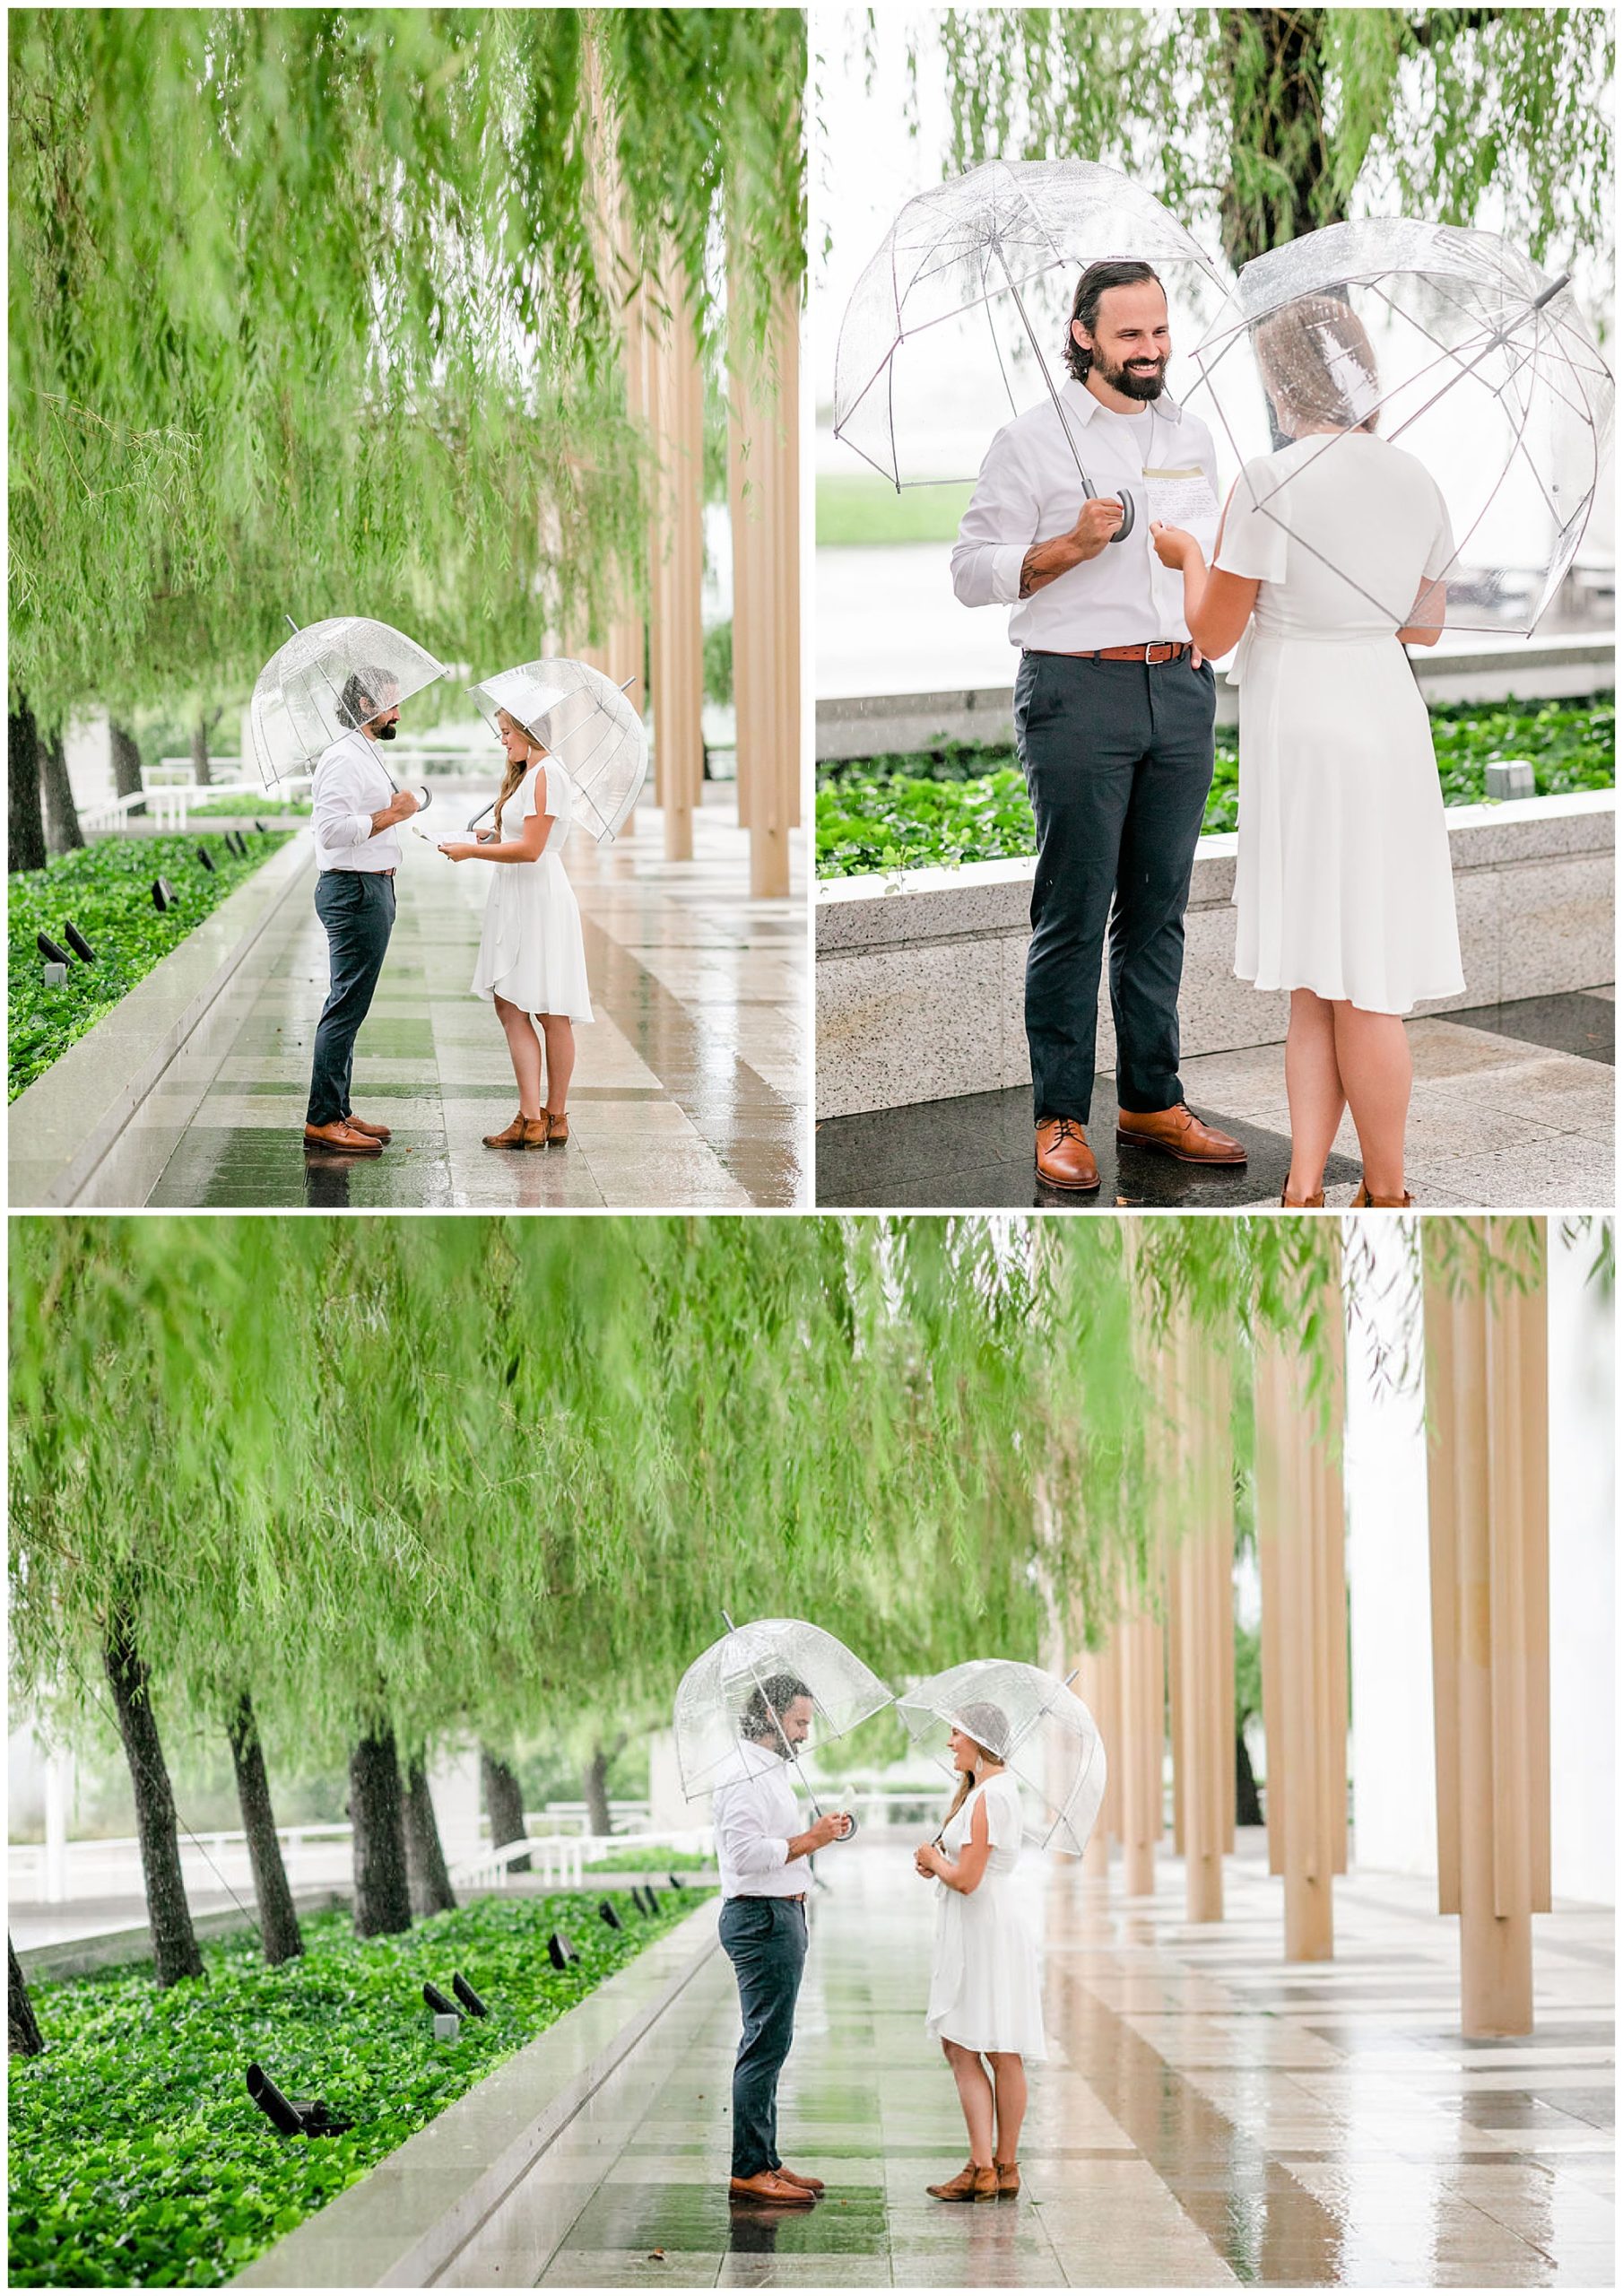 rainy Kennedy Center elopement, DC elopement, rainy day portraits, rainy elopement, rainy engagement photos, playing in the rain, Washington DC wedding photographer, DC wedding photography, playful portraits, boho couple, dancing in the rain, Rachel E.H. Photography, couple reading vows, man smiling, couple holding clear umbrellas